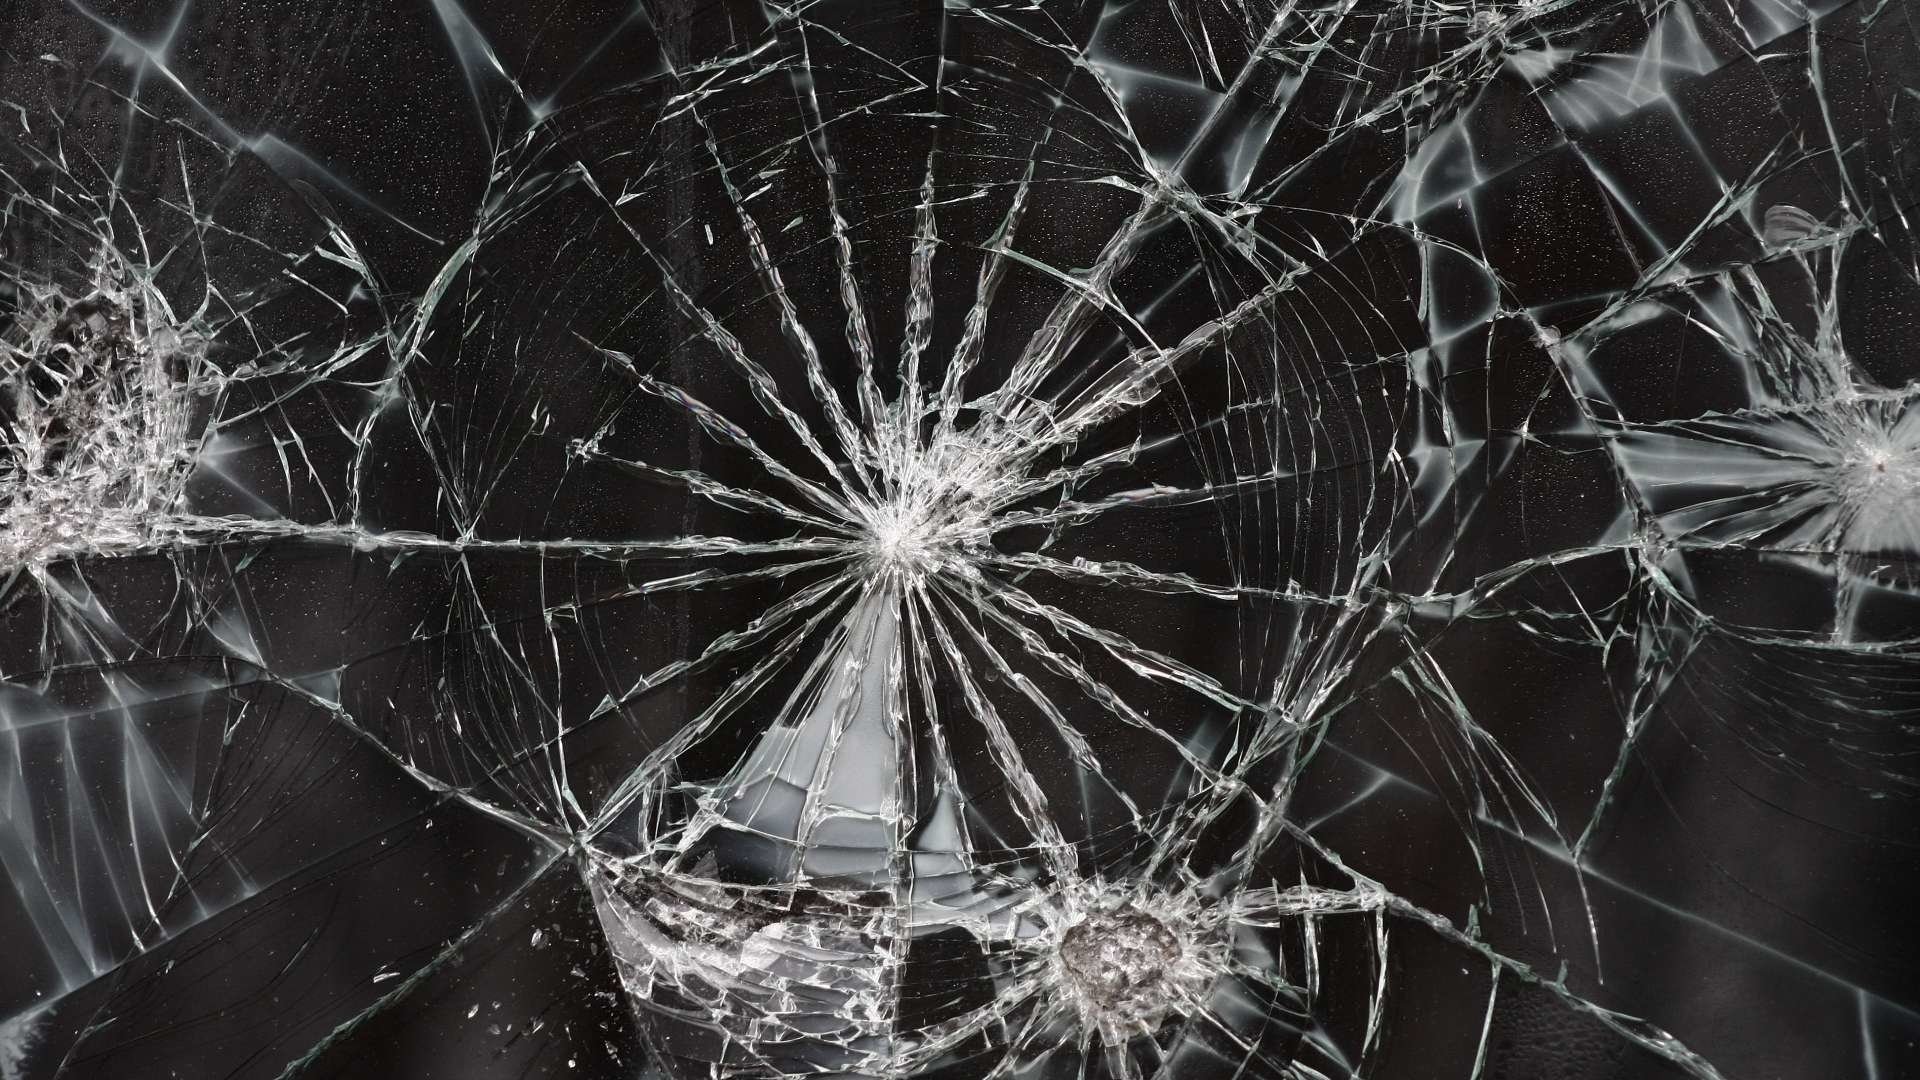 Cracked Screen Wallpapers and Background Images   stmednet